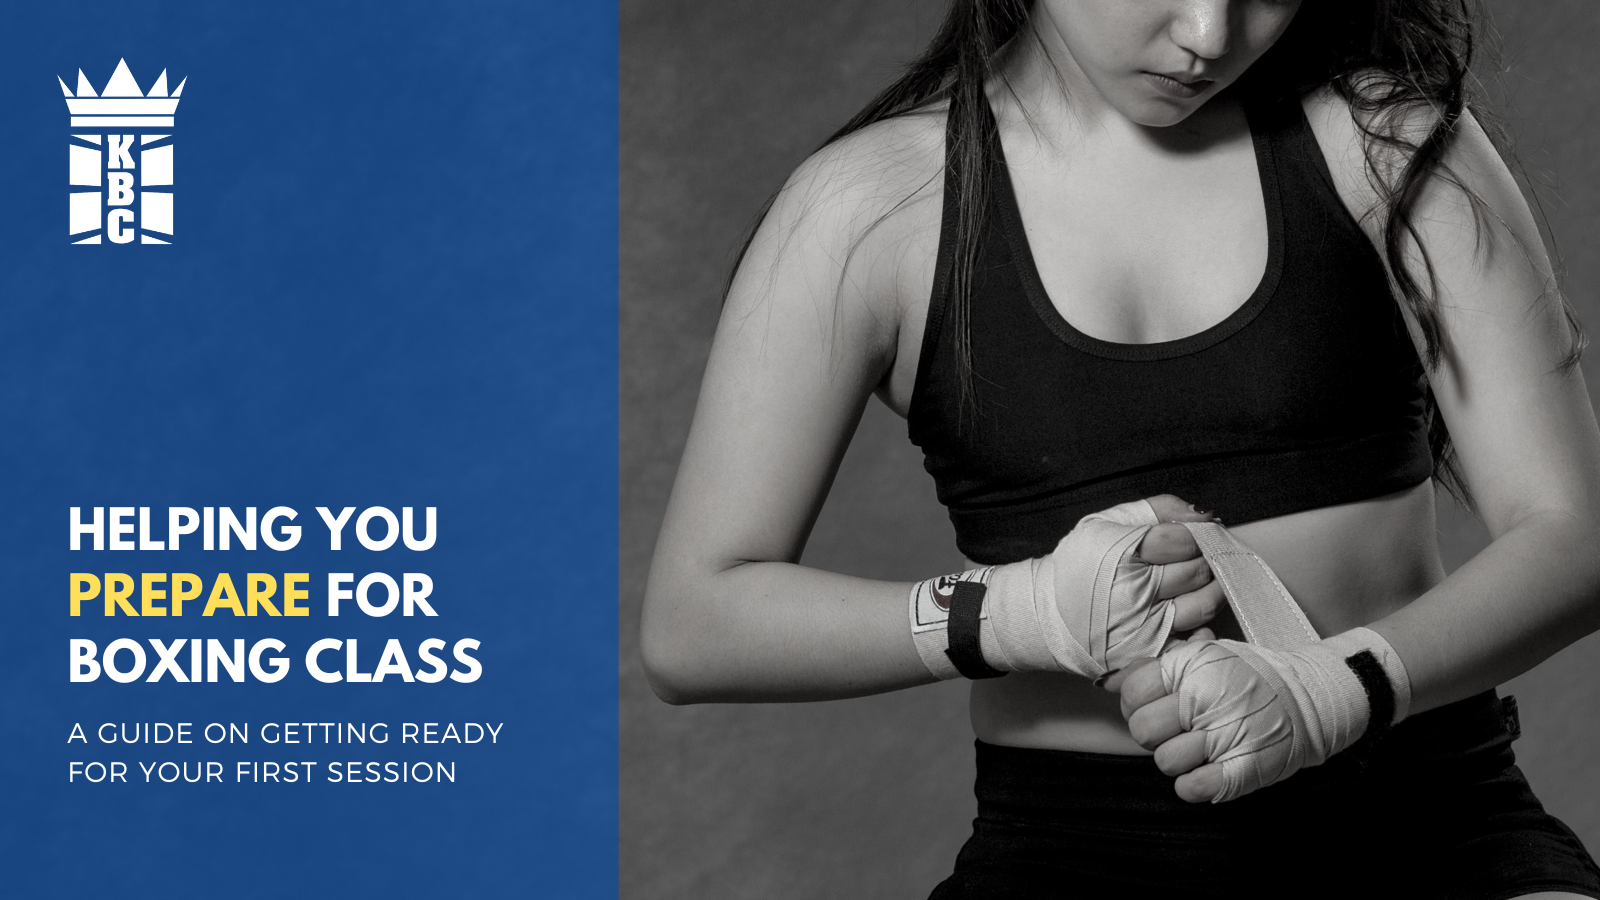 Ready to Rumble: How to Prepare for Your Session With Kingsway Boxing 🥊